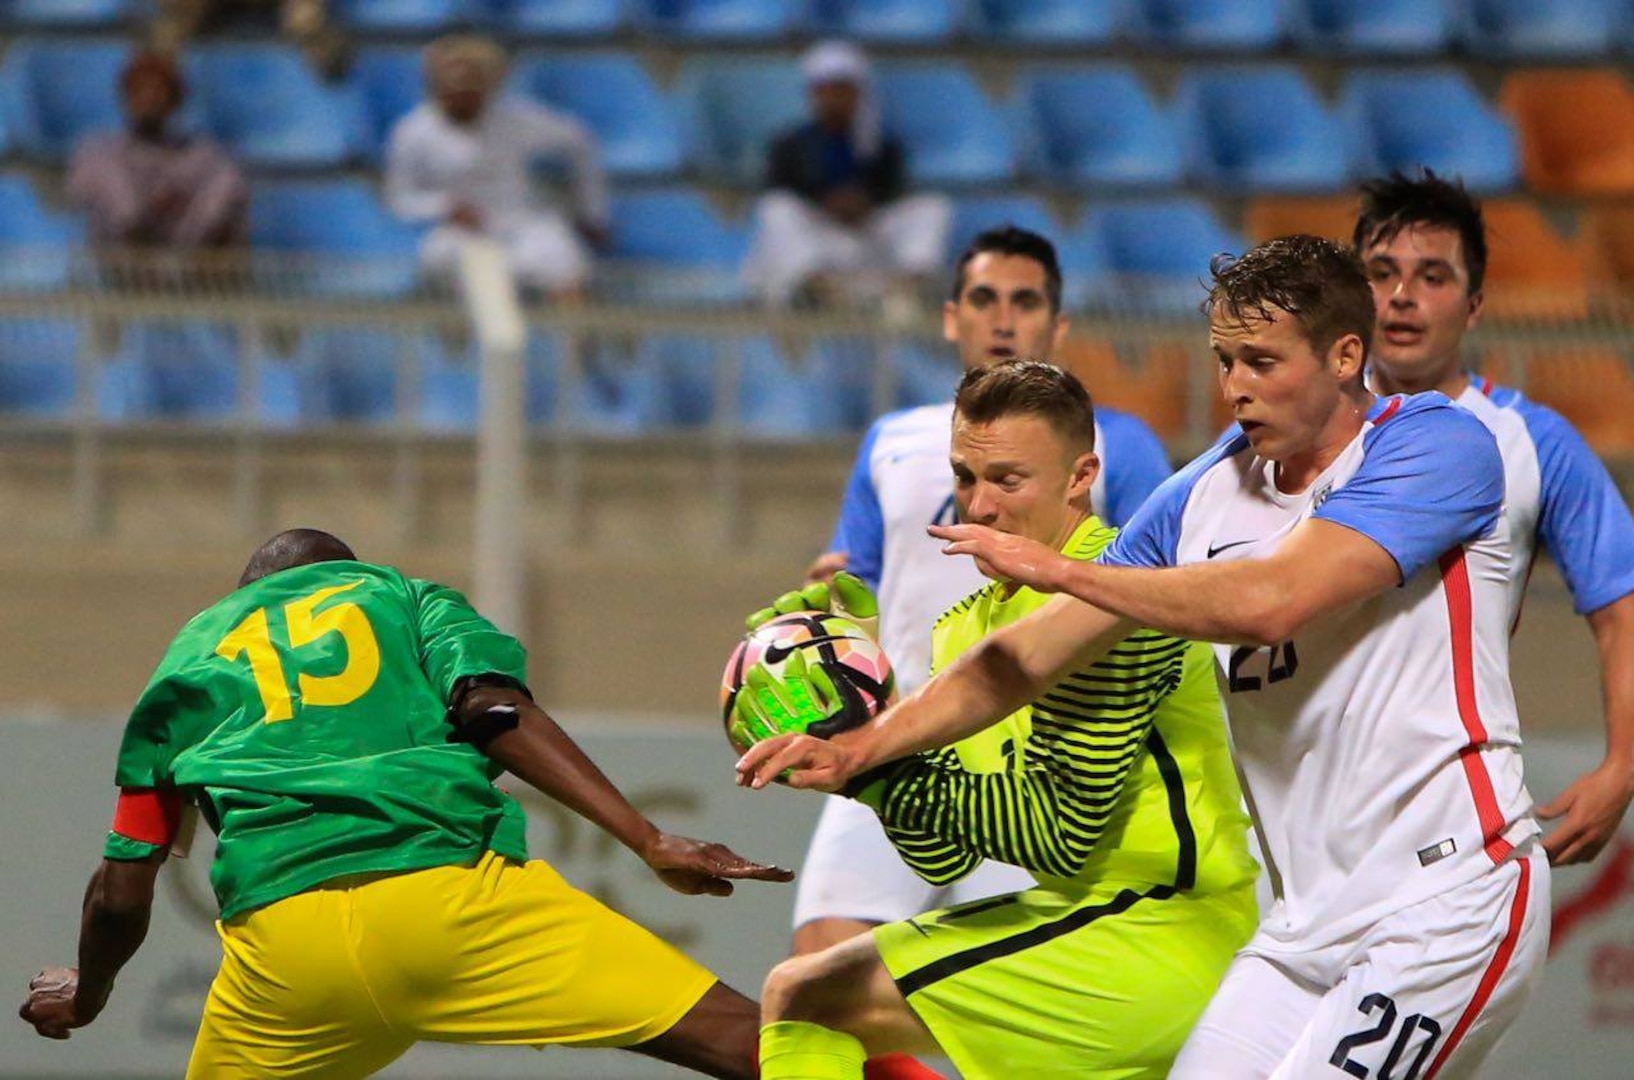 USA vs Mali at the 2017 CISM World Football Cup in Muscat, Oman 13-29 January. 